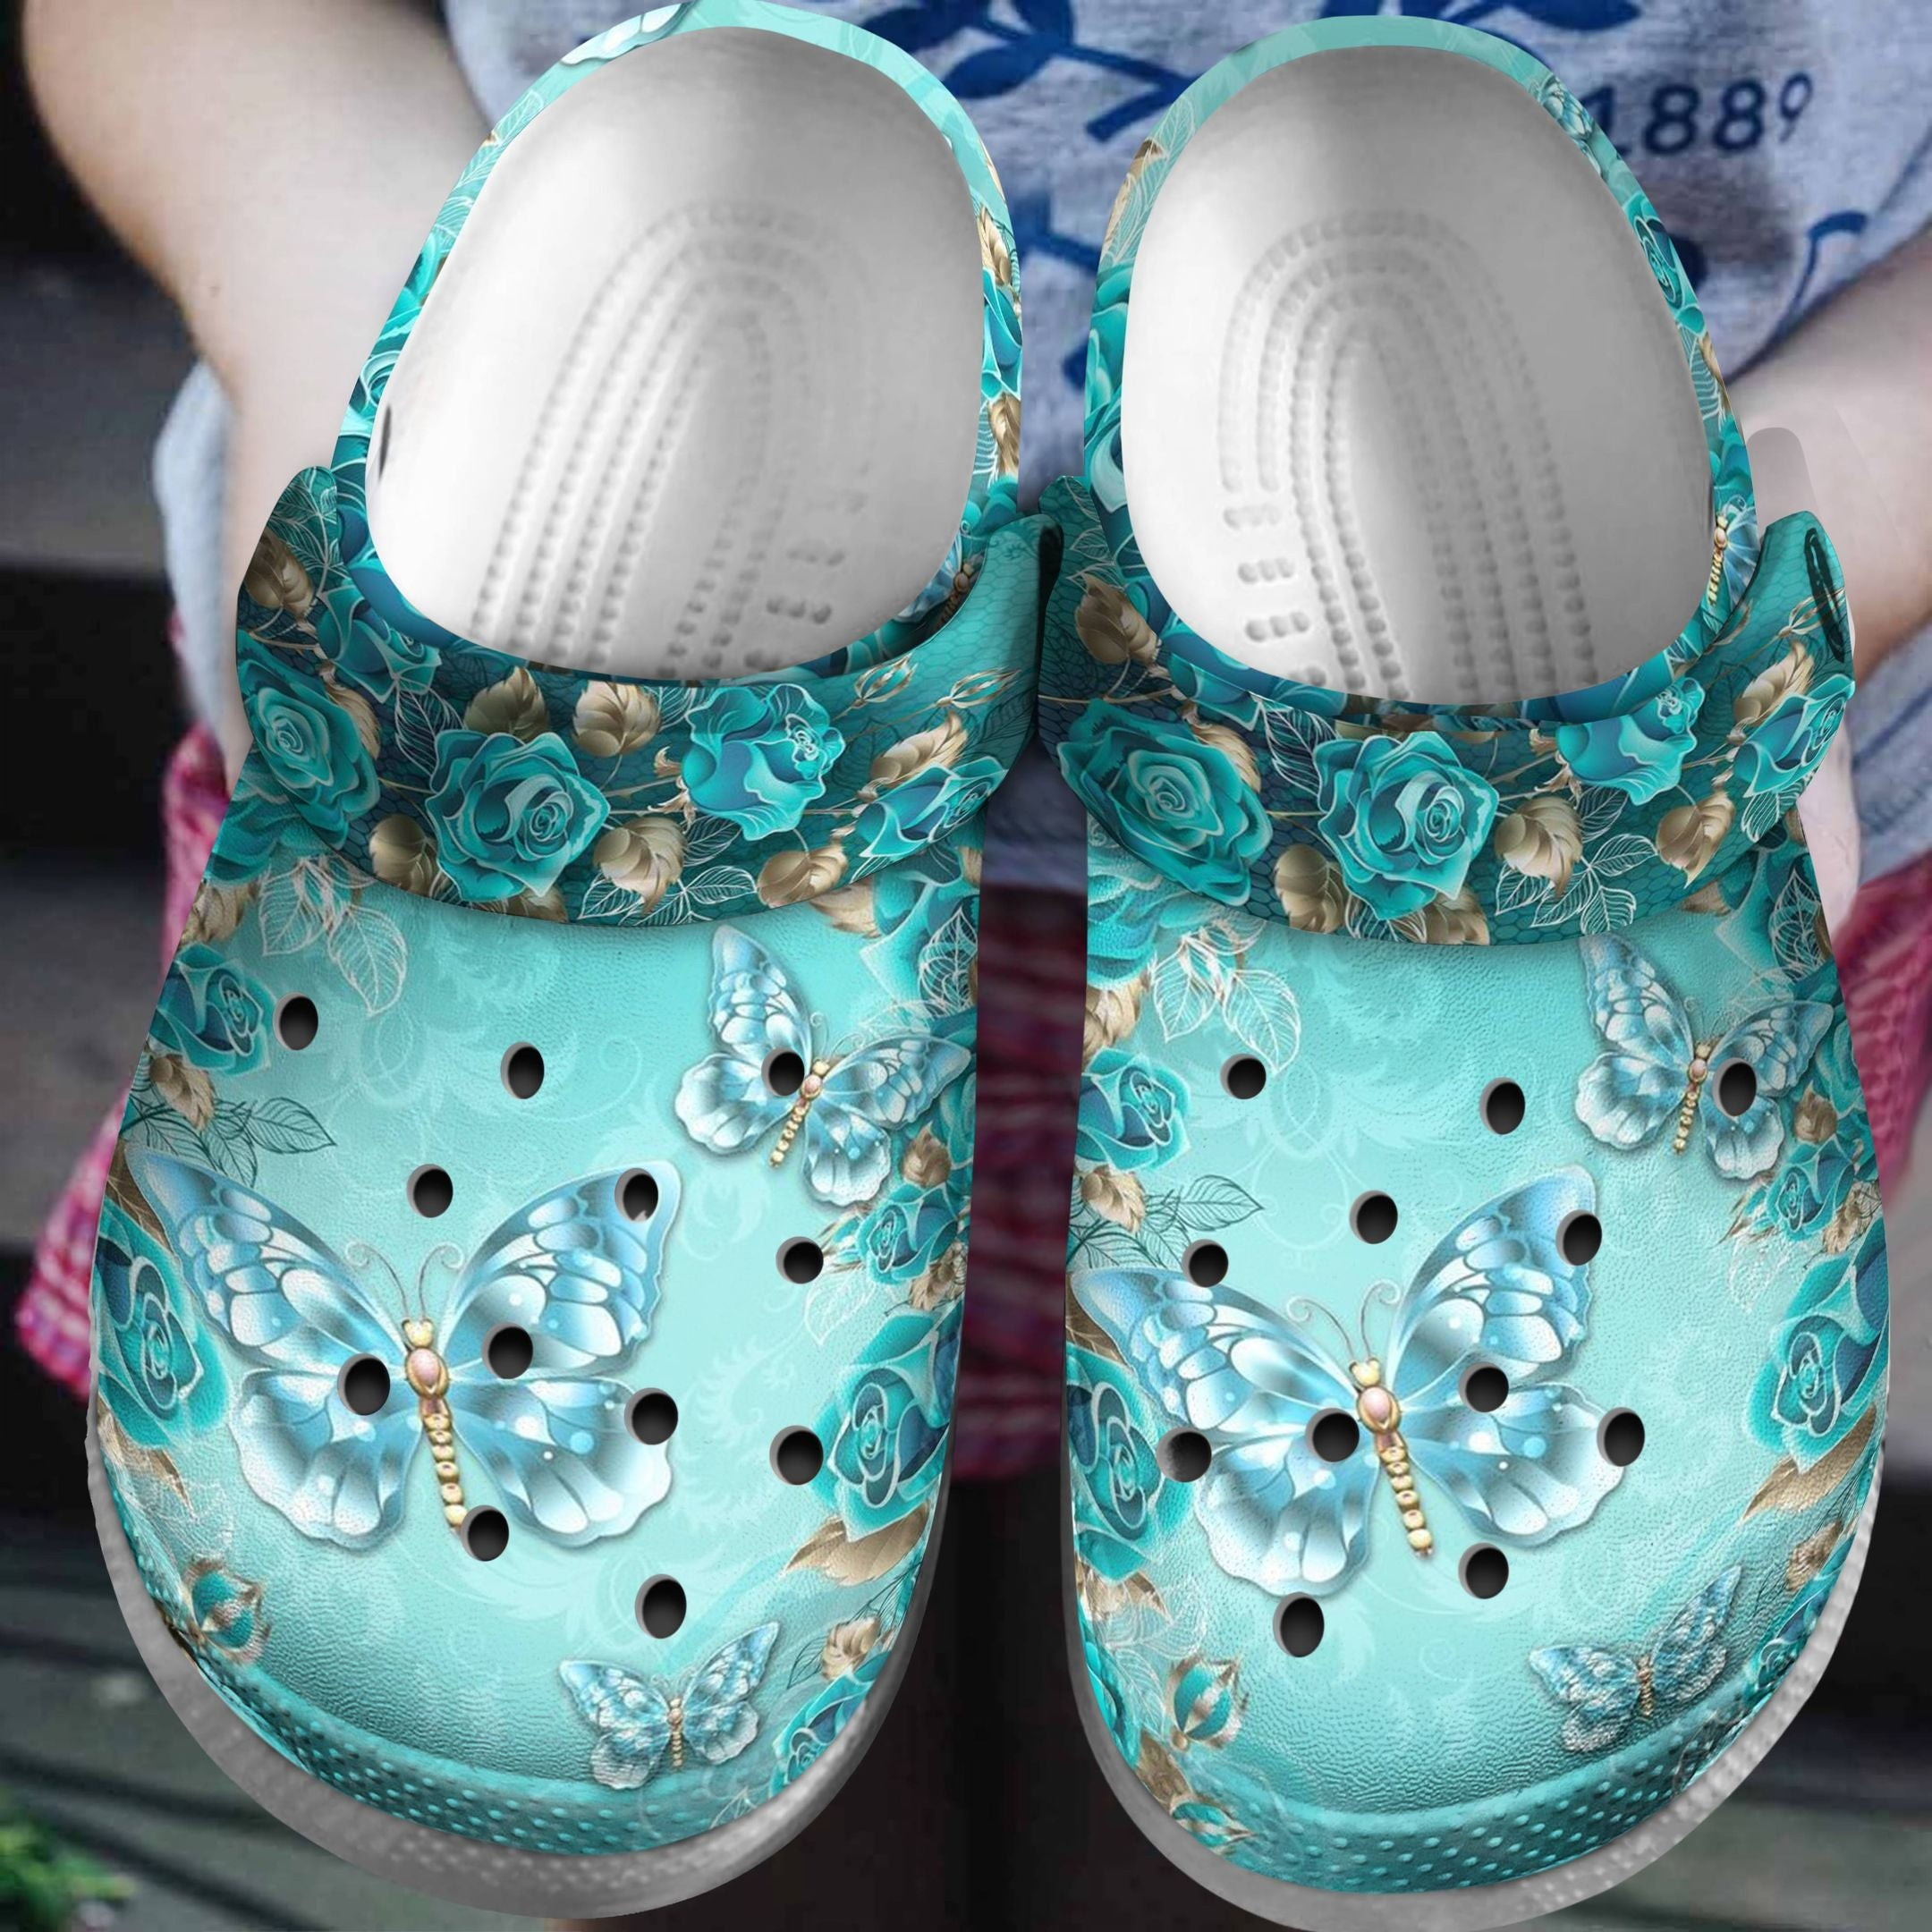 Stone Butterfly Croc Shoes For Women - Roses Butterfly Shoes Crocbland Clog Gifts For Mother Day Grandma